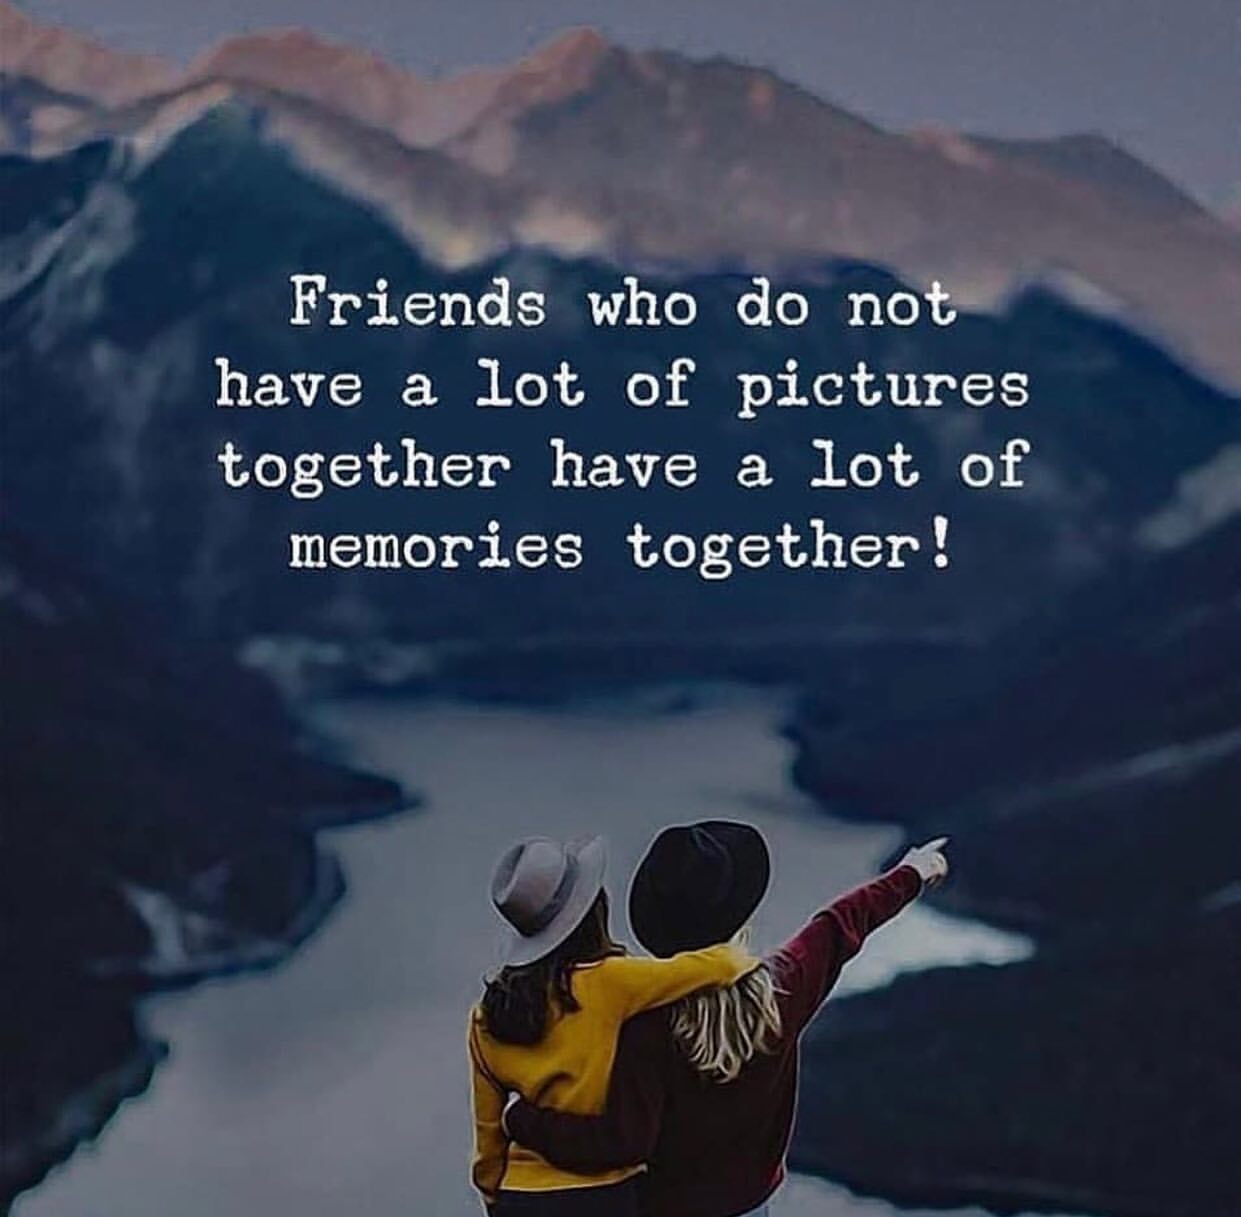 Friends who do not have a lot of pictures together have a lot of memories together!